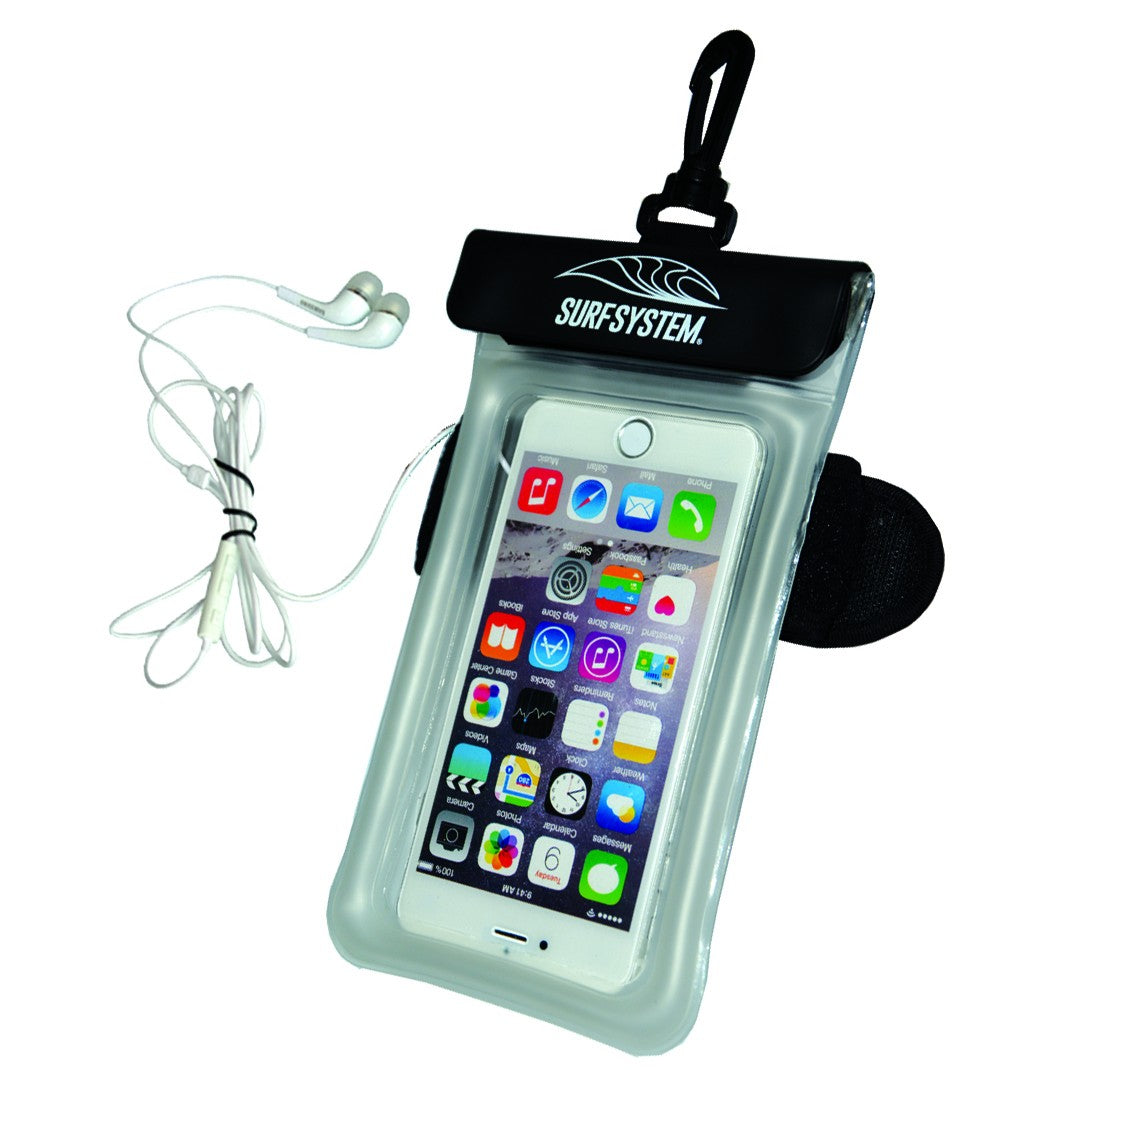 SURF SYSTEM - Floating waterproof pouch for smartphone - With audio jack and armband